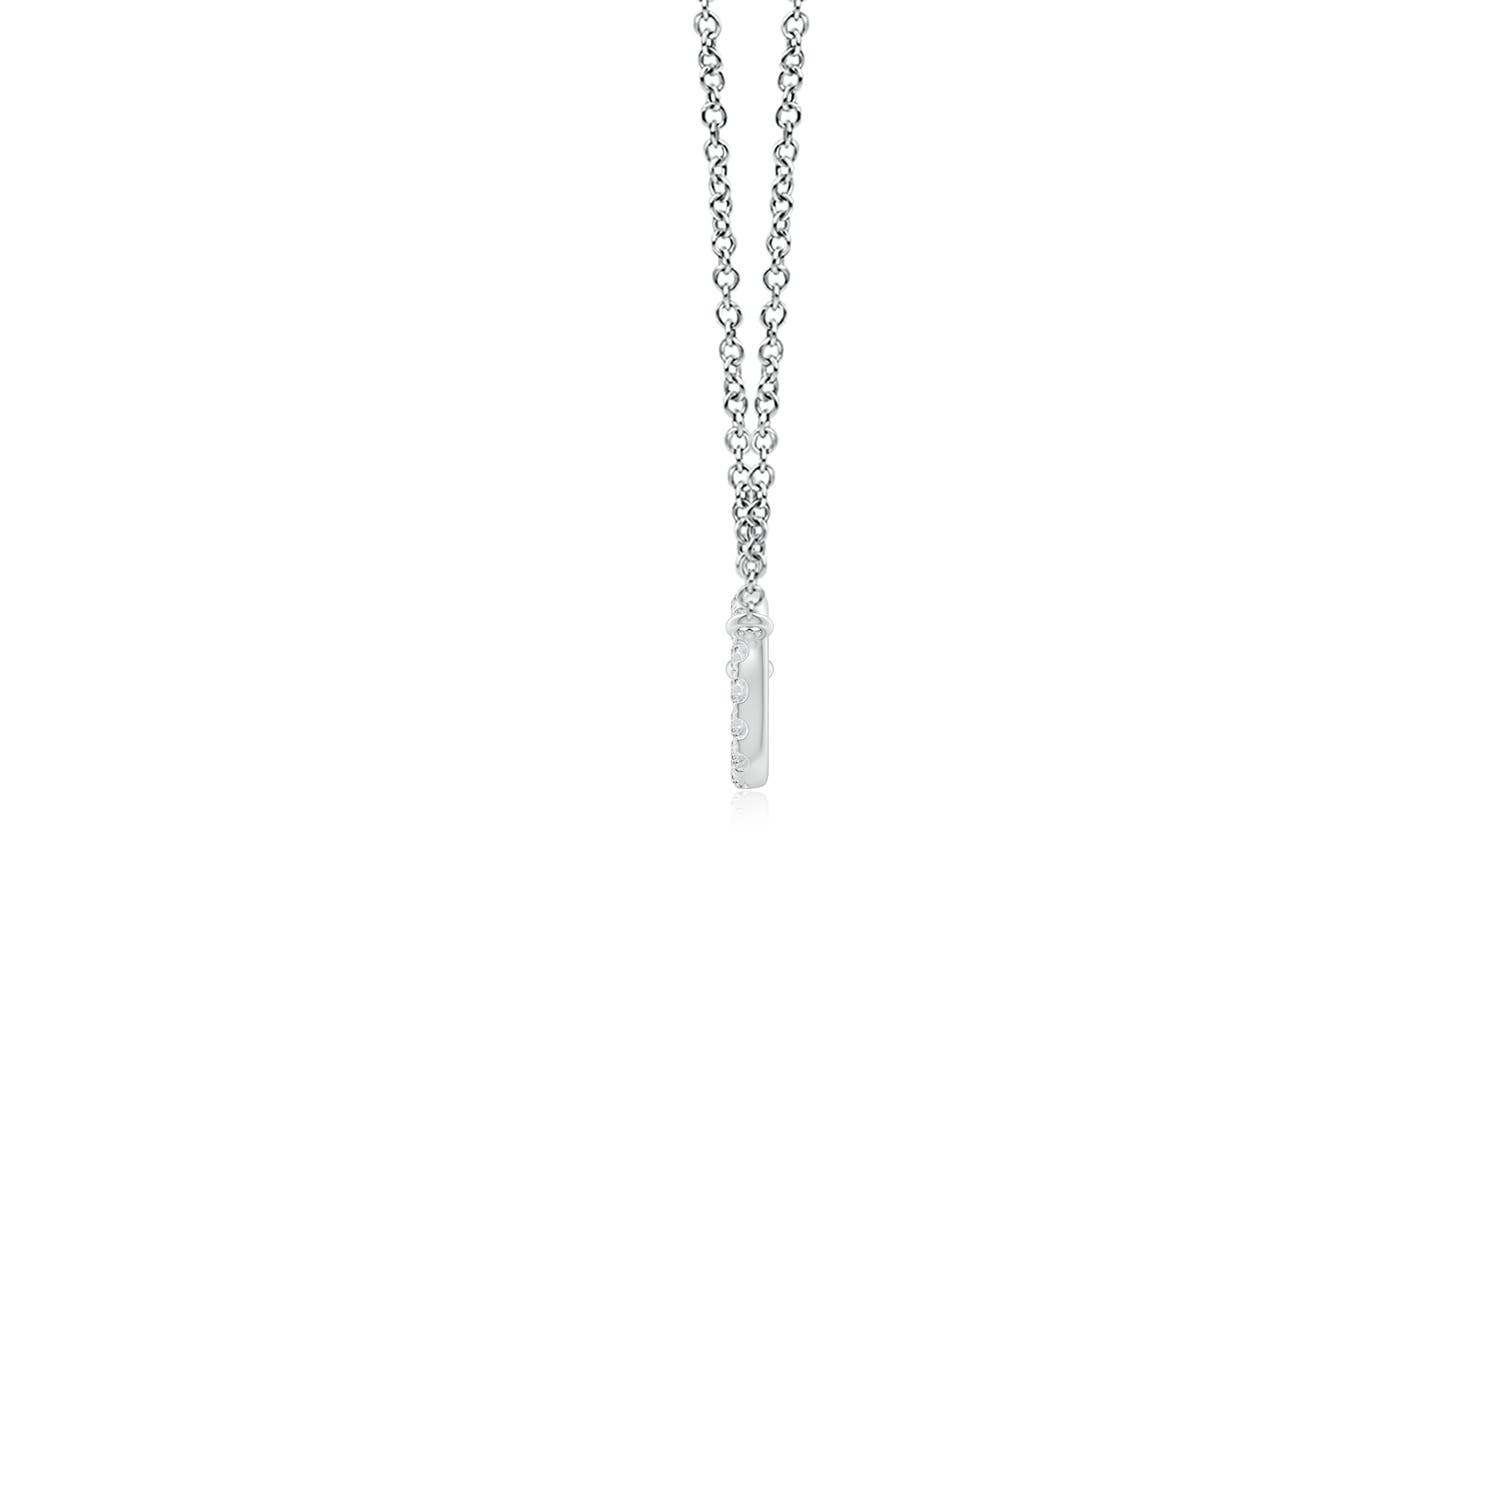 H, SI2 / 0.14 CT / 14 KT White Gold